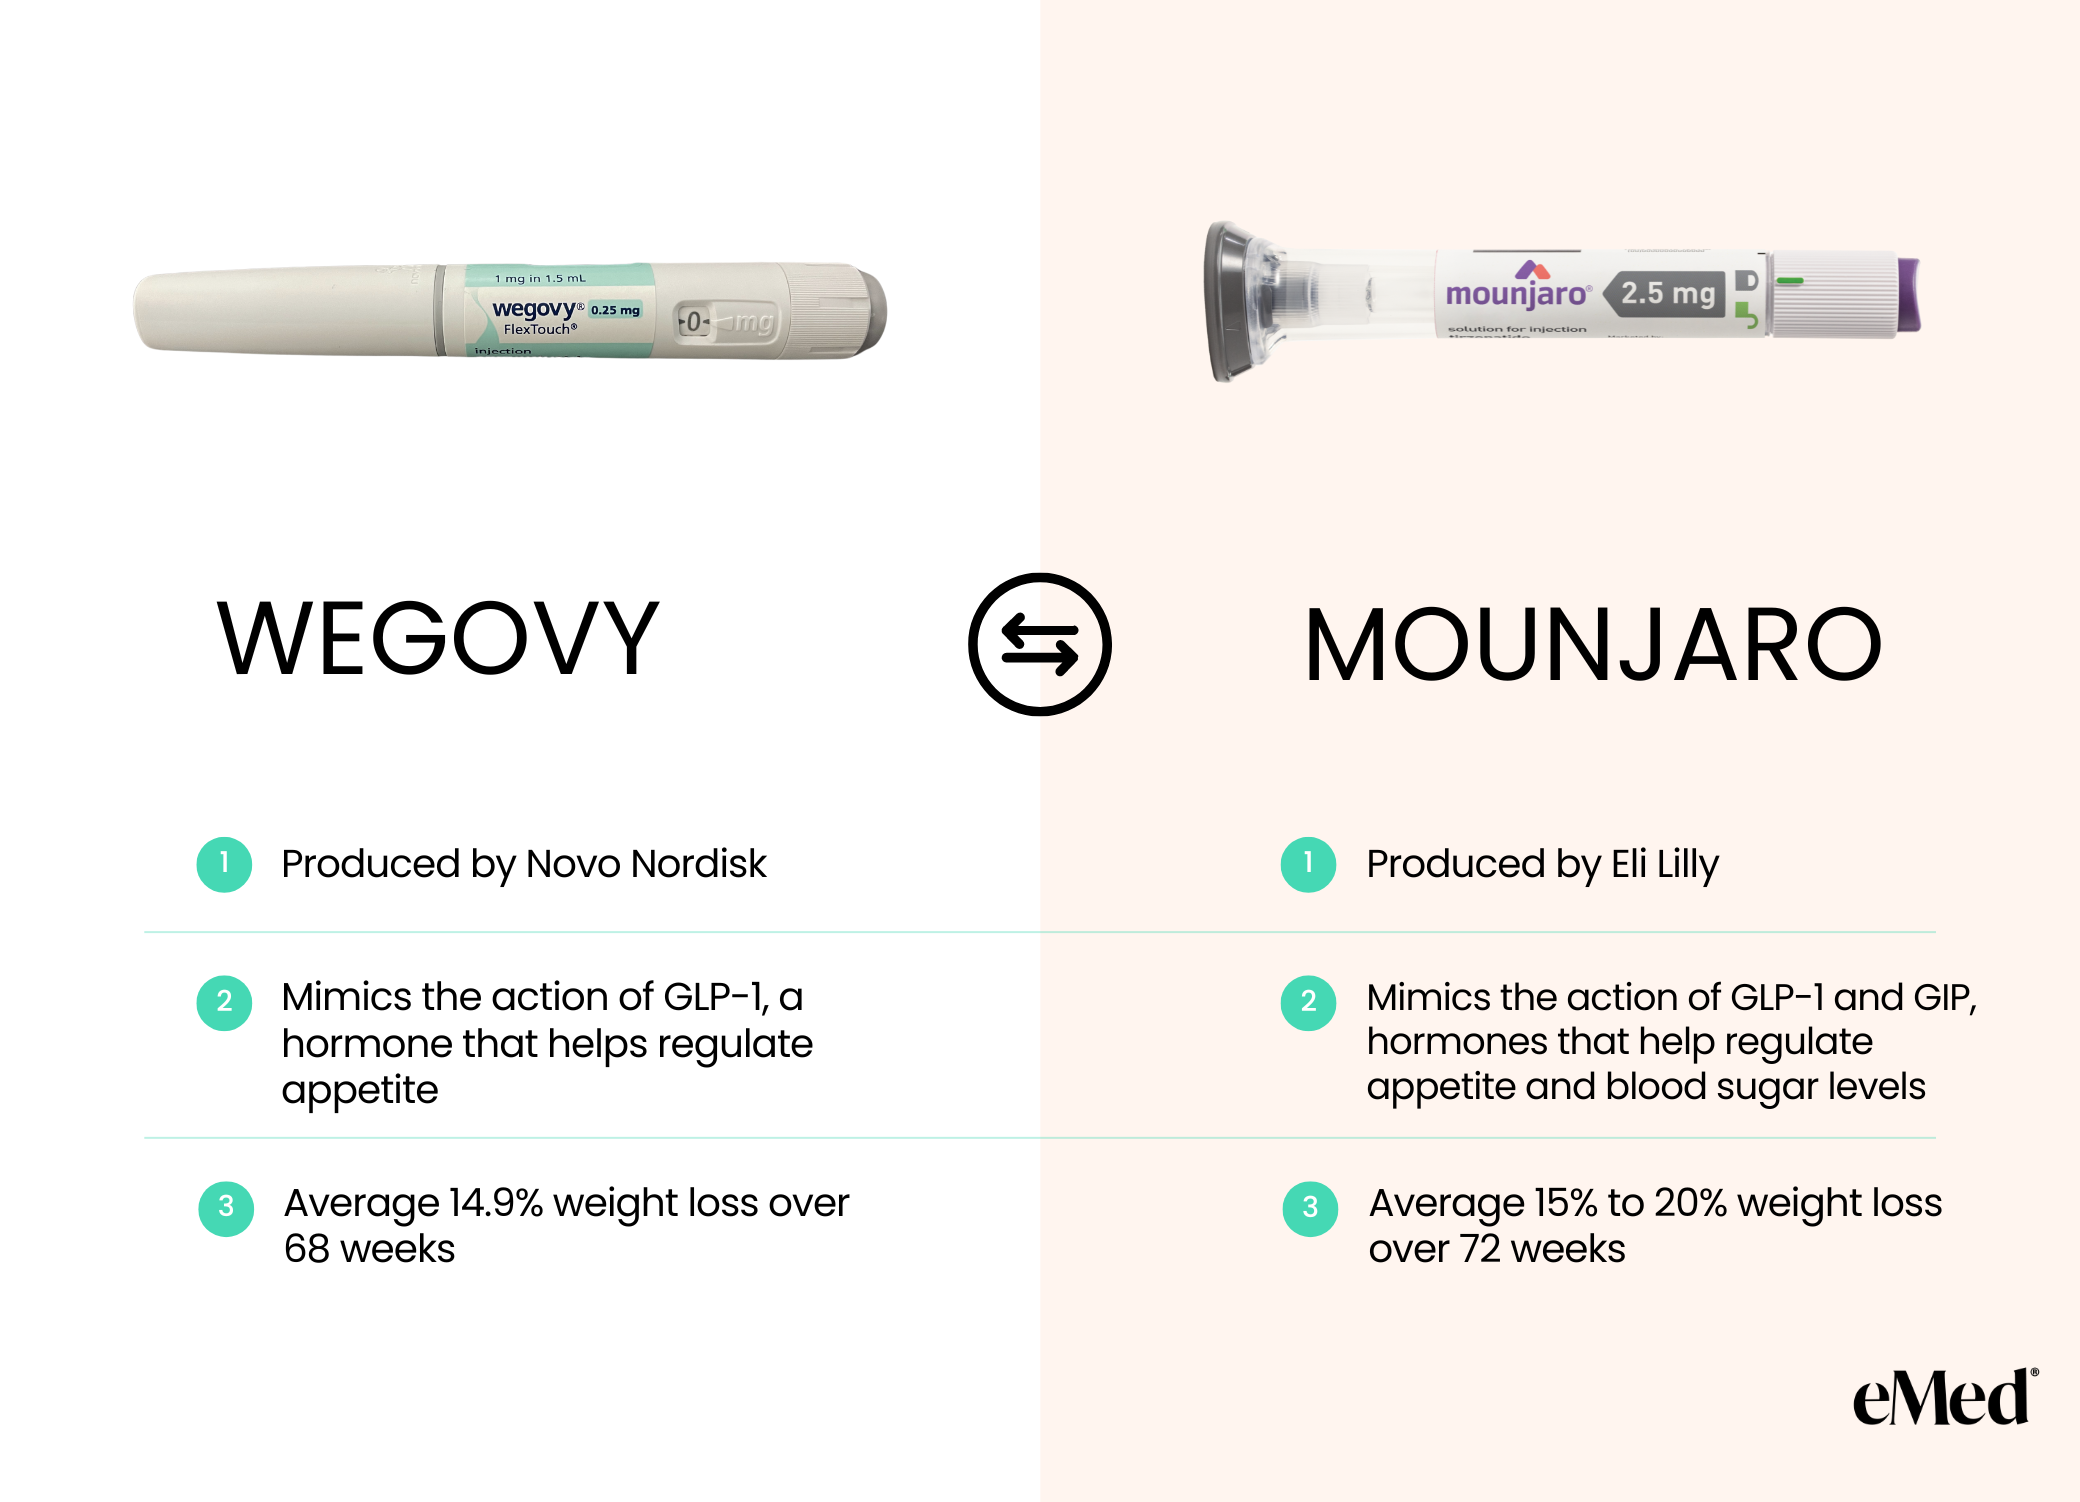 An infographic comparing Wegovy and Mounjaro, highlighting similarities, differences, and considerations for switching